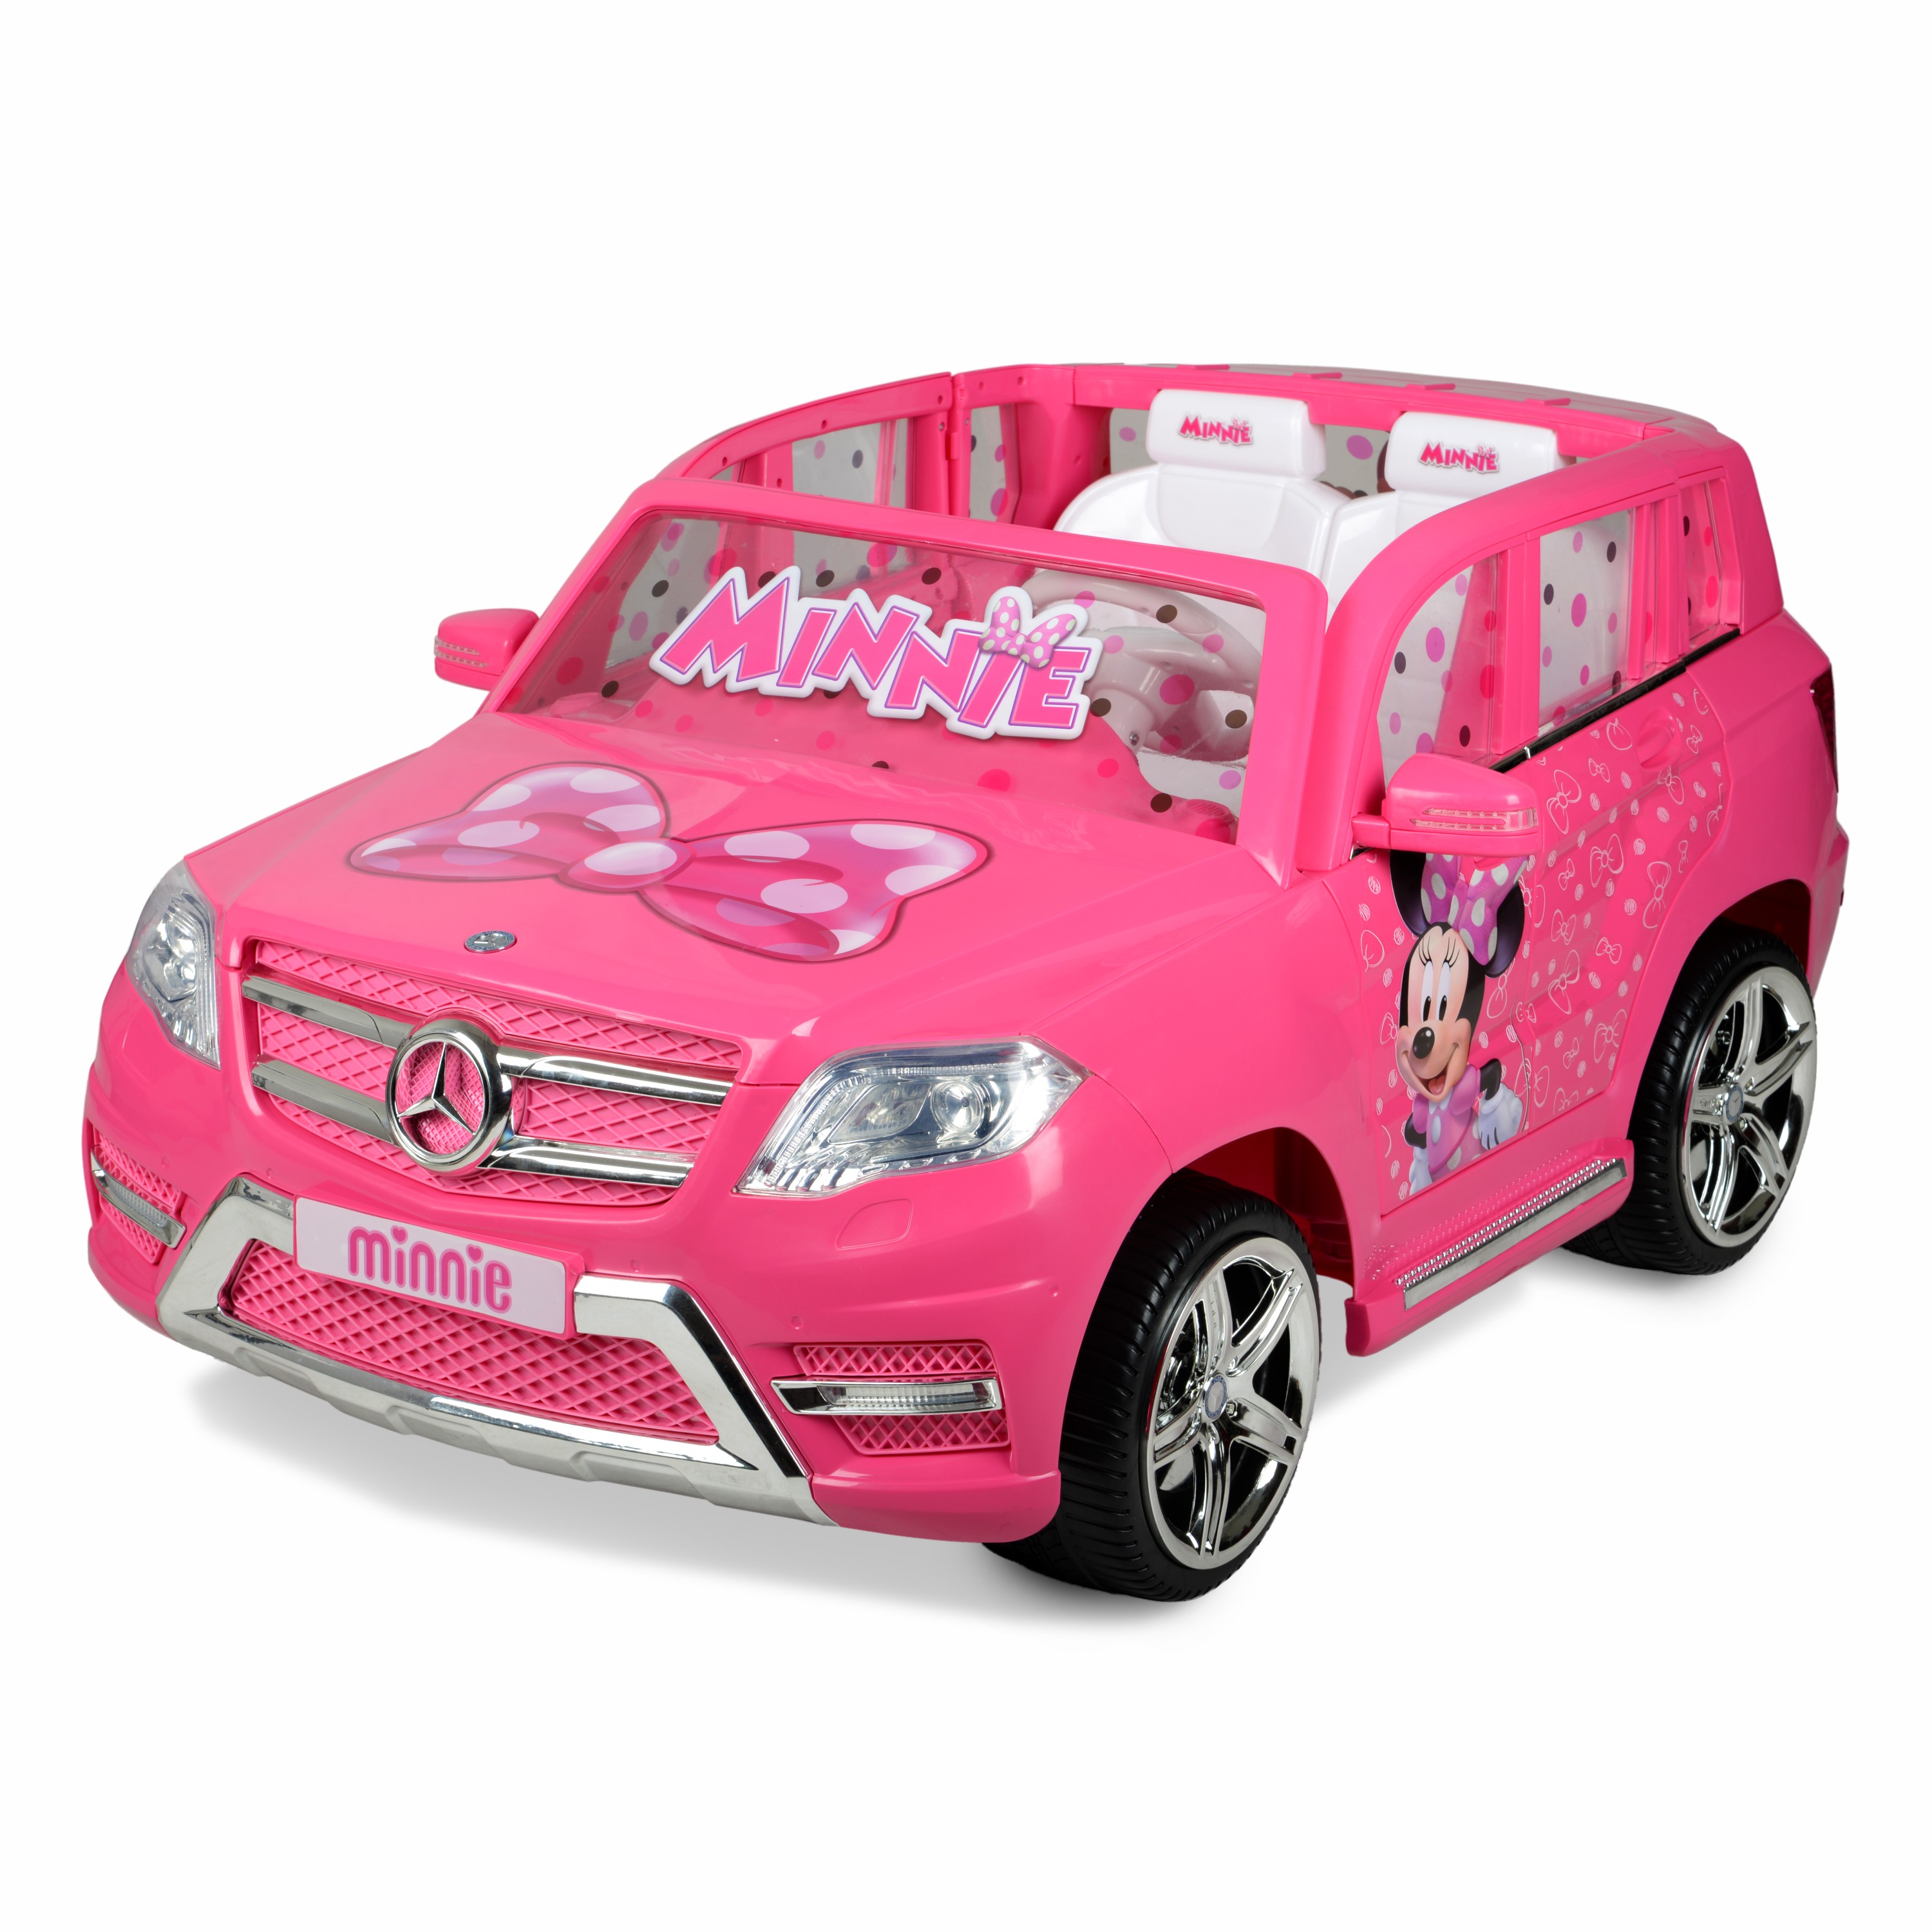 12 Volt Minnie Mouse Mercedes Battery Powered Ride On - Your little ones will ride in Luxury! - image 5 of 6